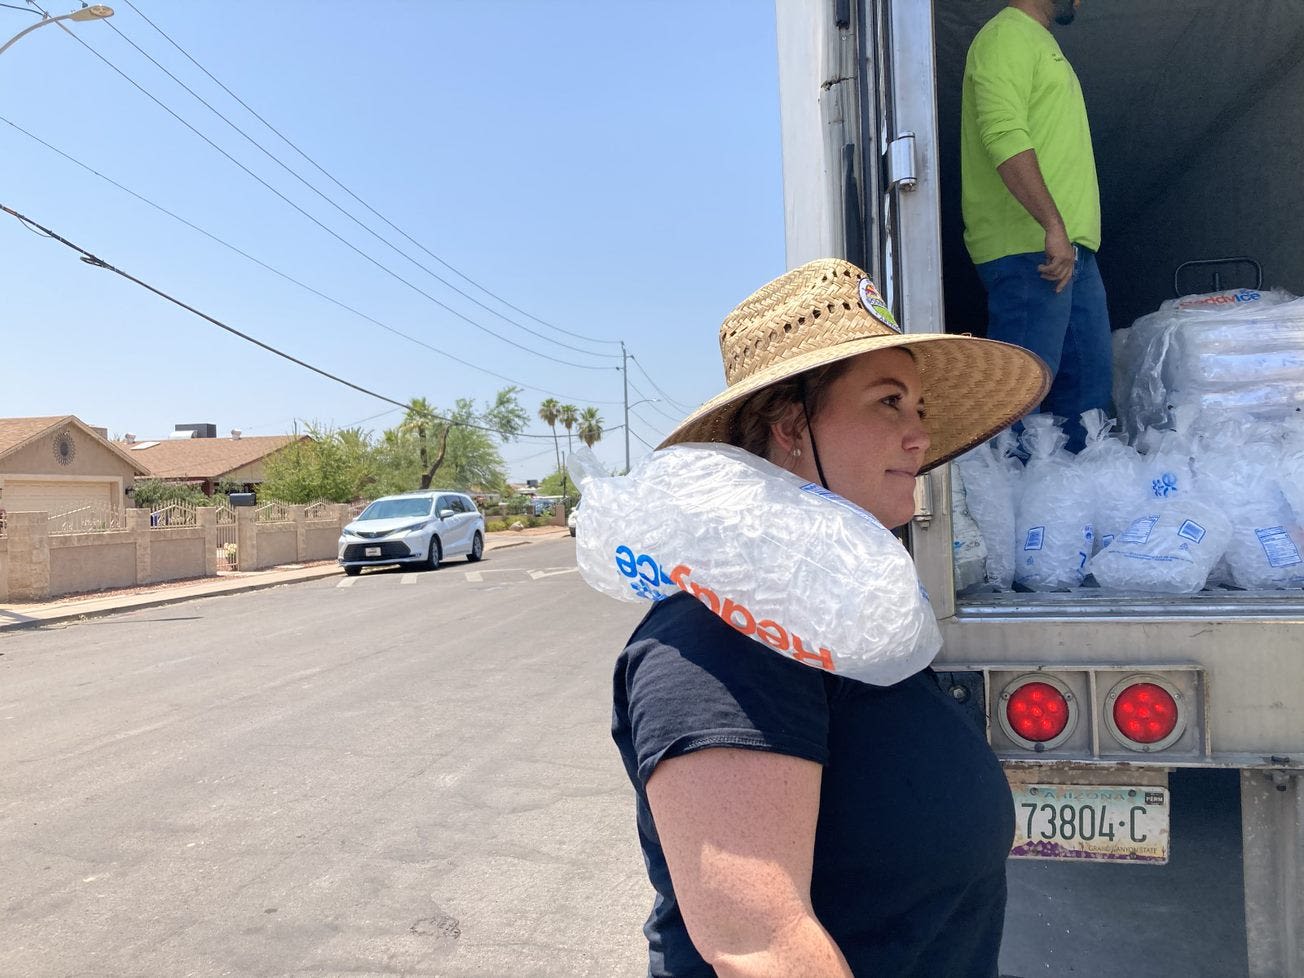 Misery ends for Phoenix residents who lost air conditioning in 100-degree heat